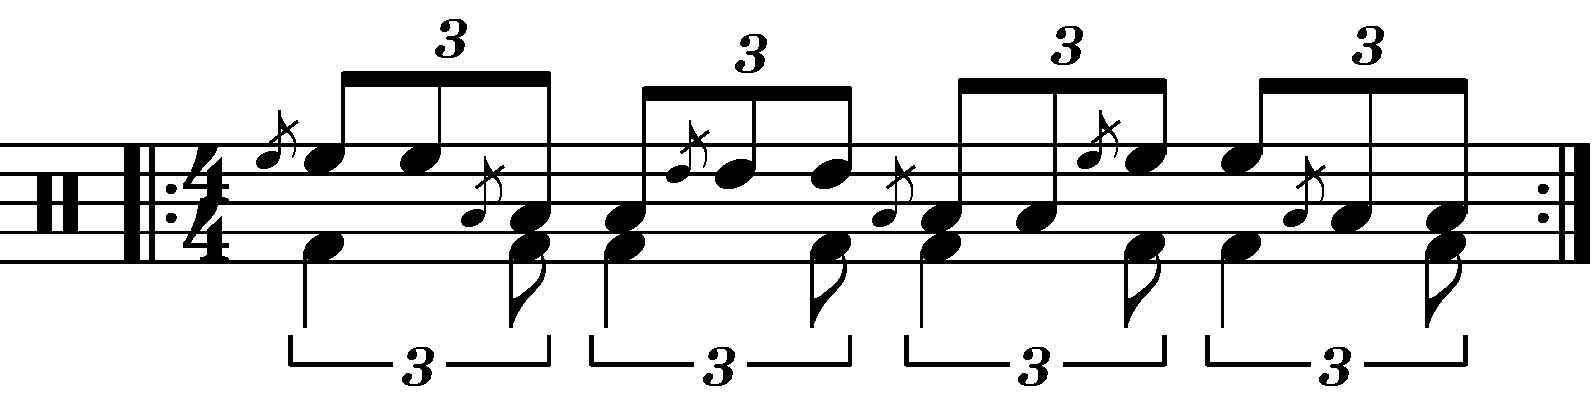 A triplet flam tap moving in two note blocks